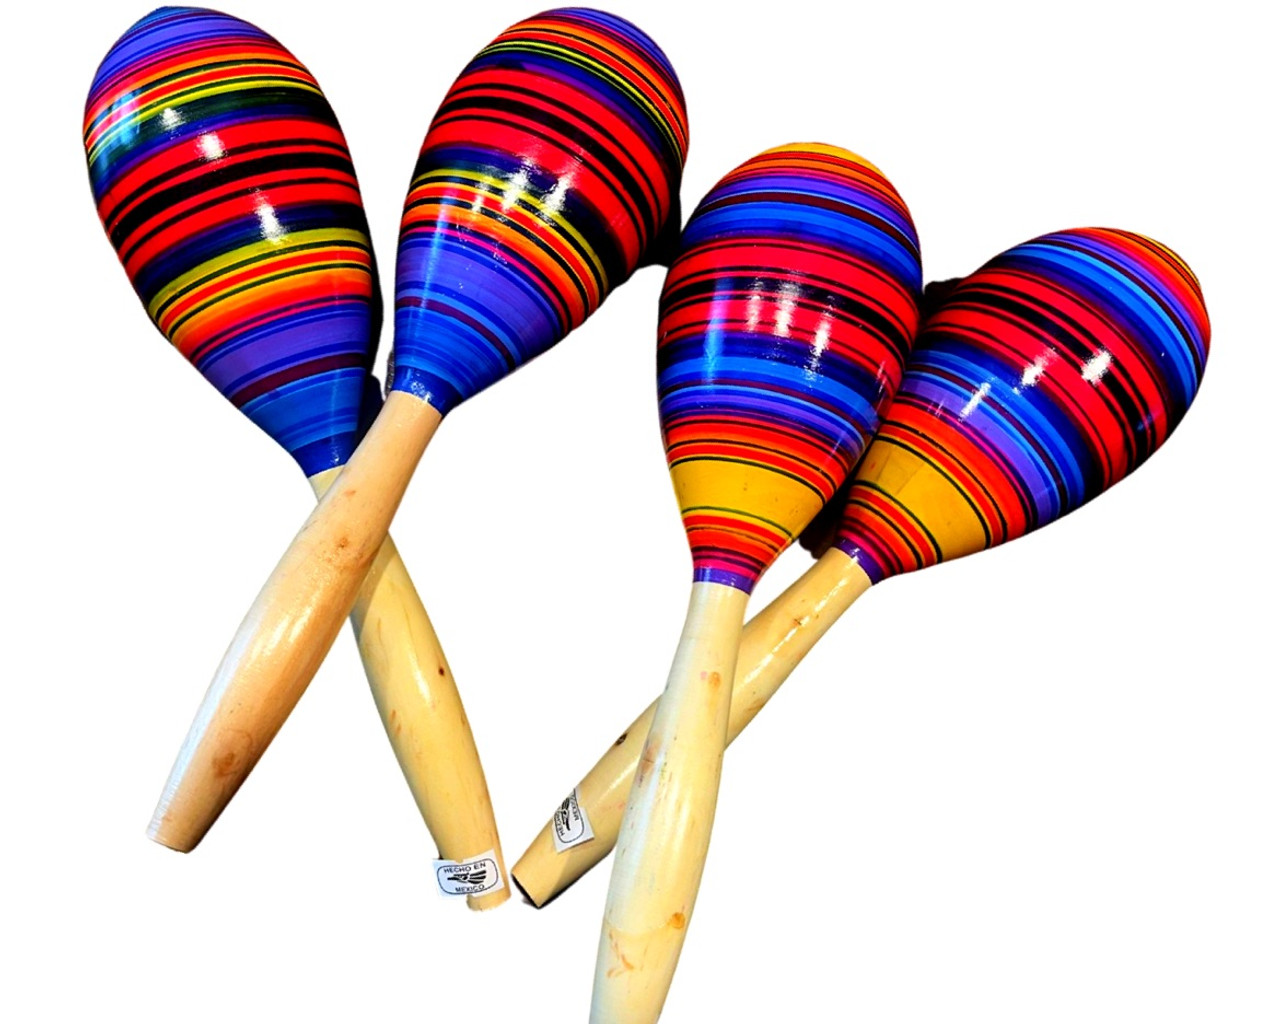 Wood Maracas - Rhythm Band Instruments Wood Rumba Shakers Shakers  Percussion Instrument Party Favors